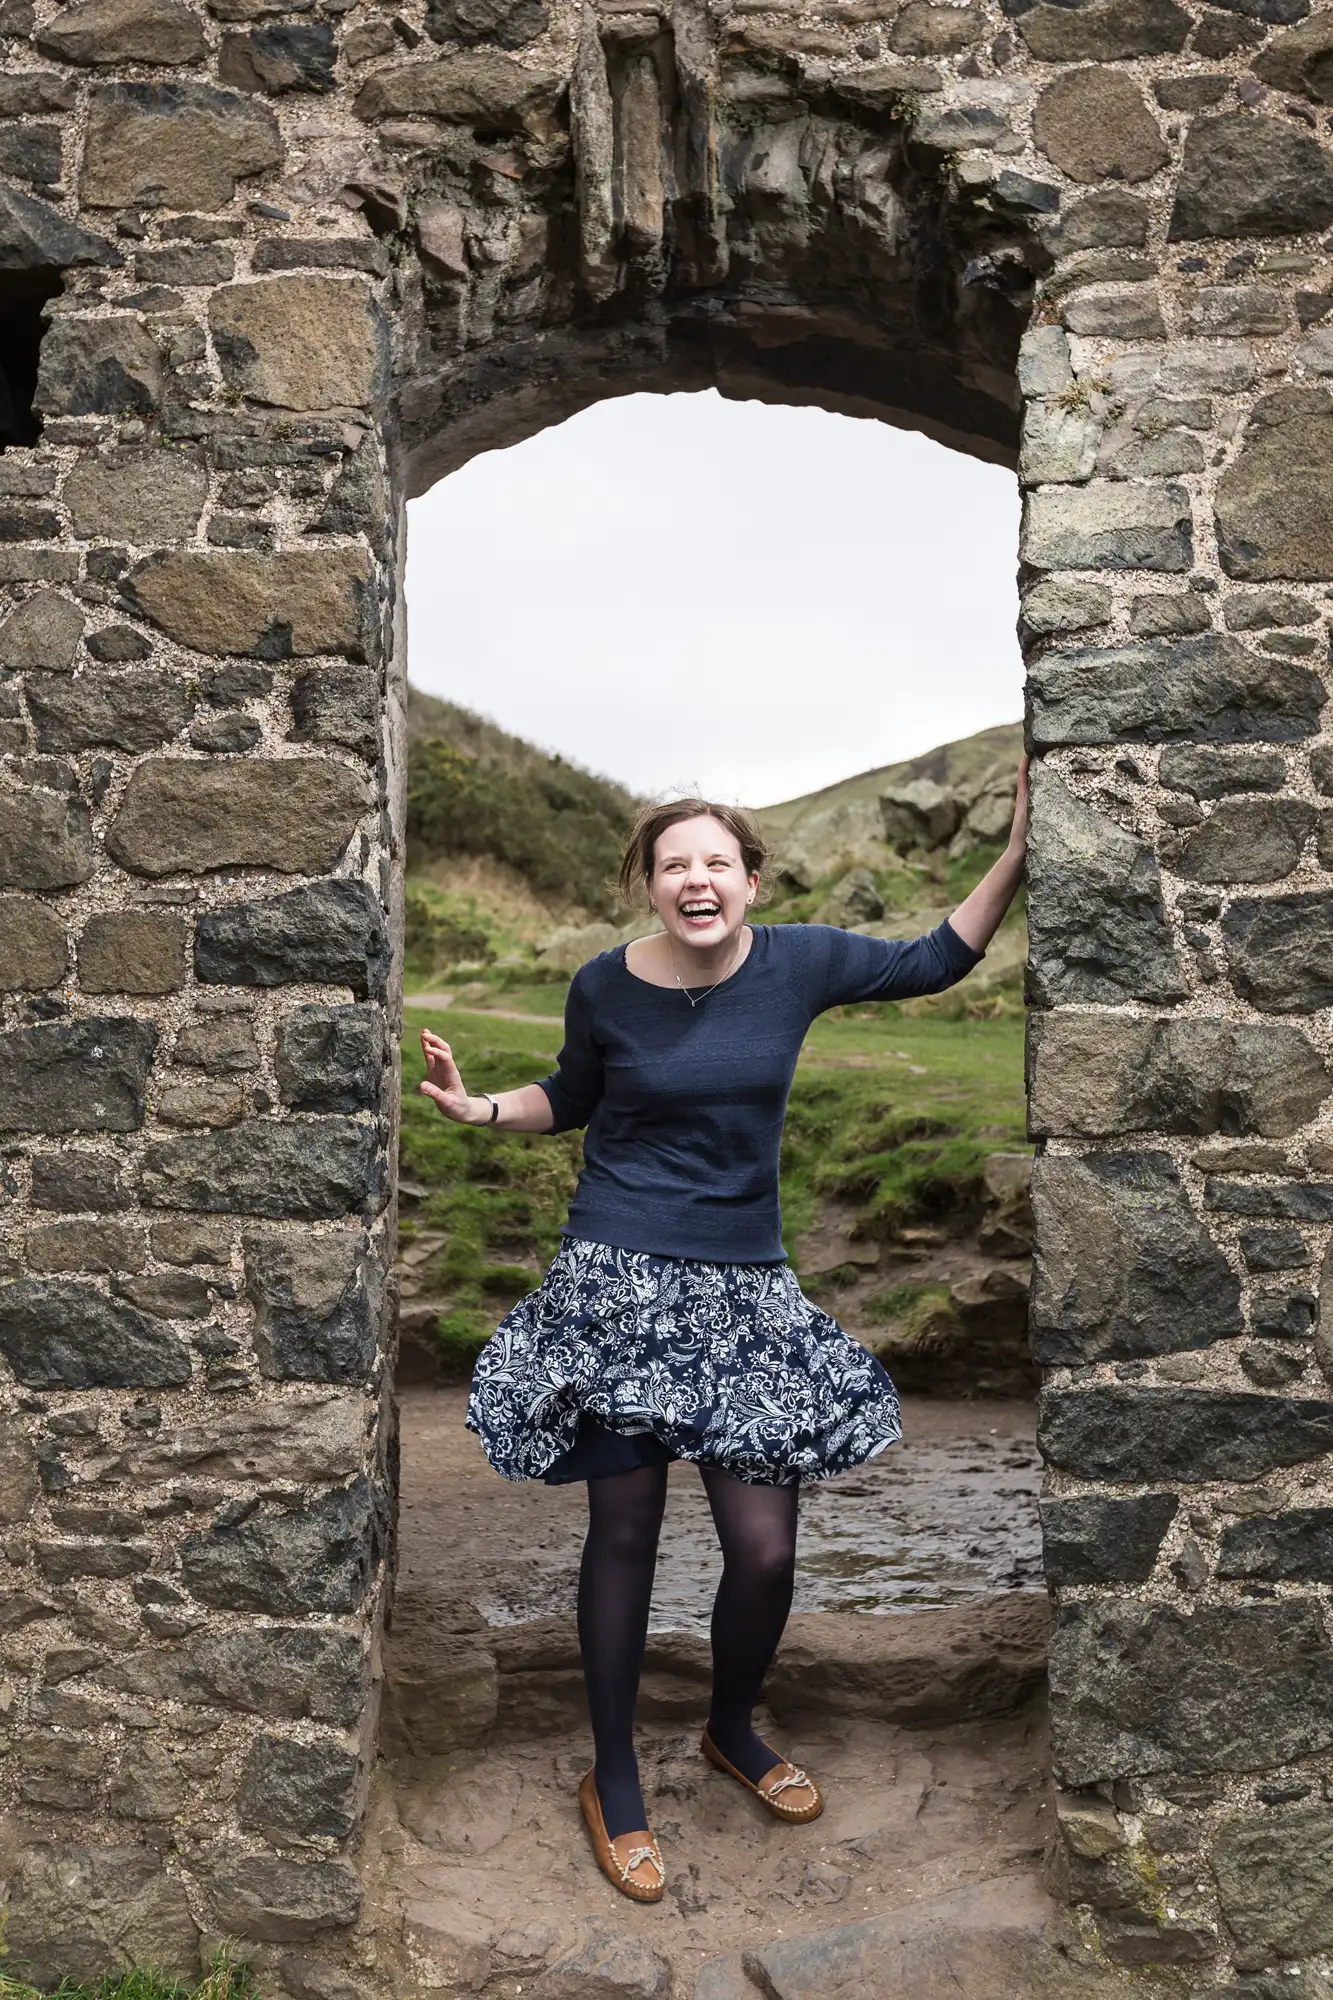 A joyful woman in a dress and tights stands in an open stone doorway, laughing with arms extended, amid a grassy landscape.